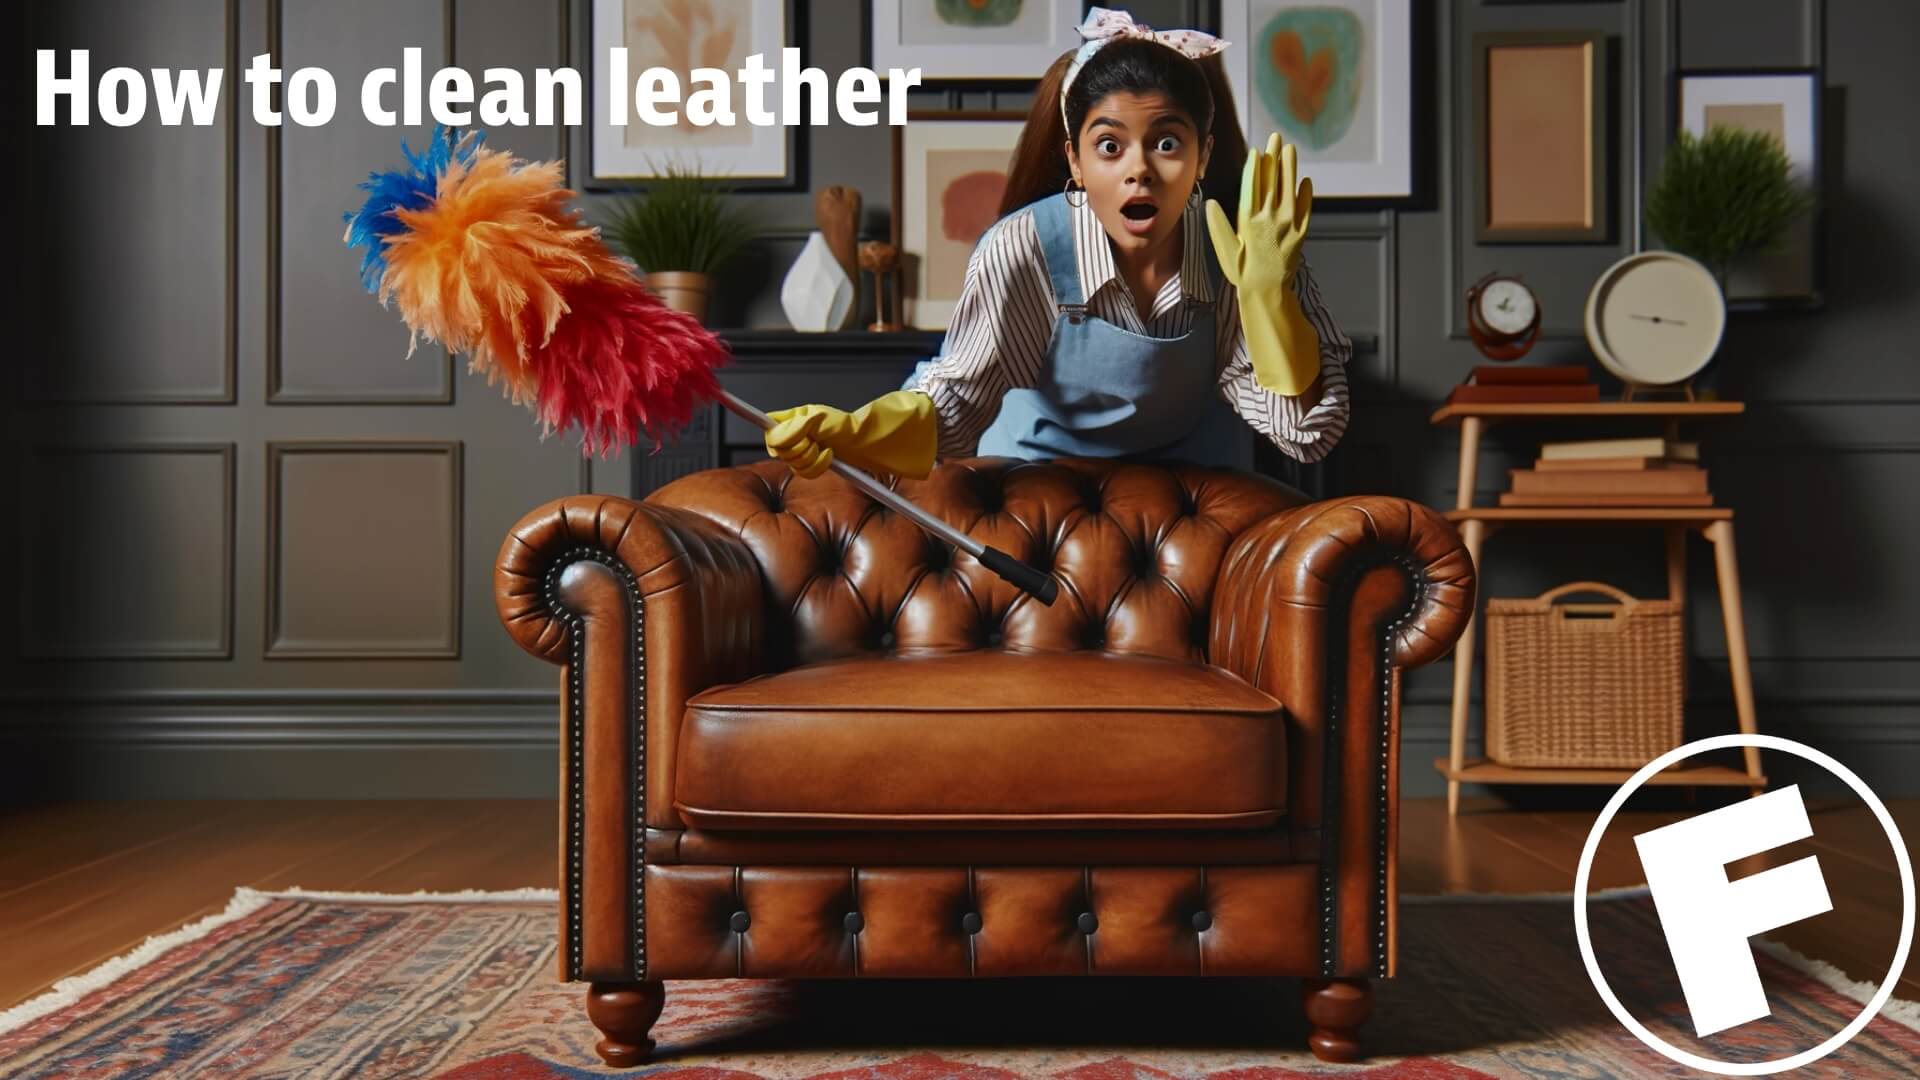 a woman pleasantly shocked at how effective our leather cleaning methods have been